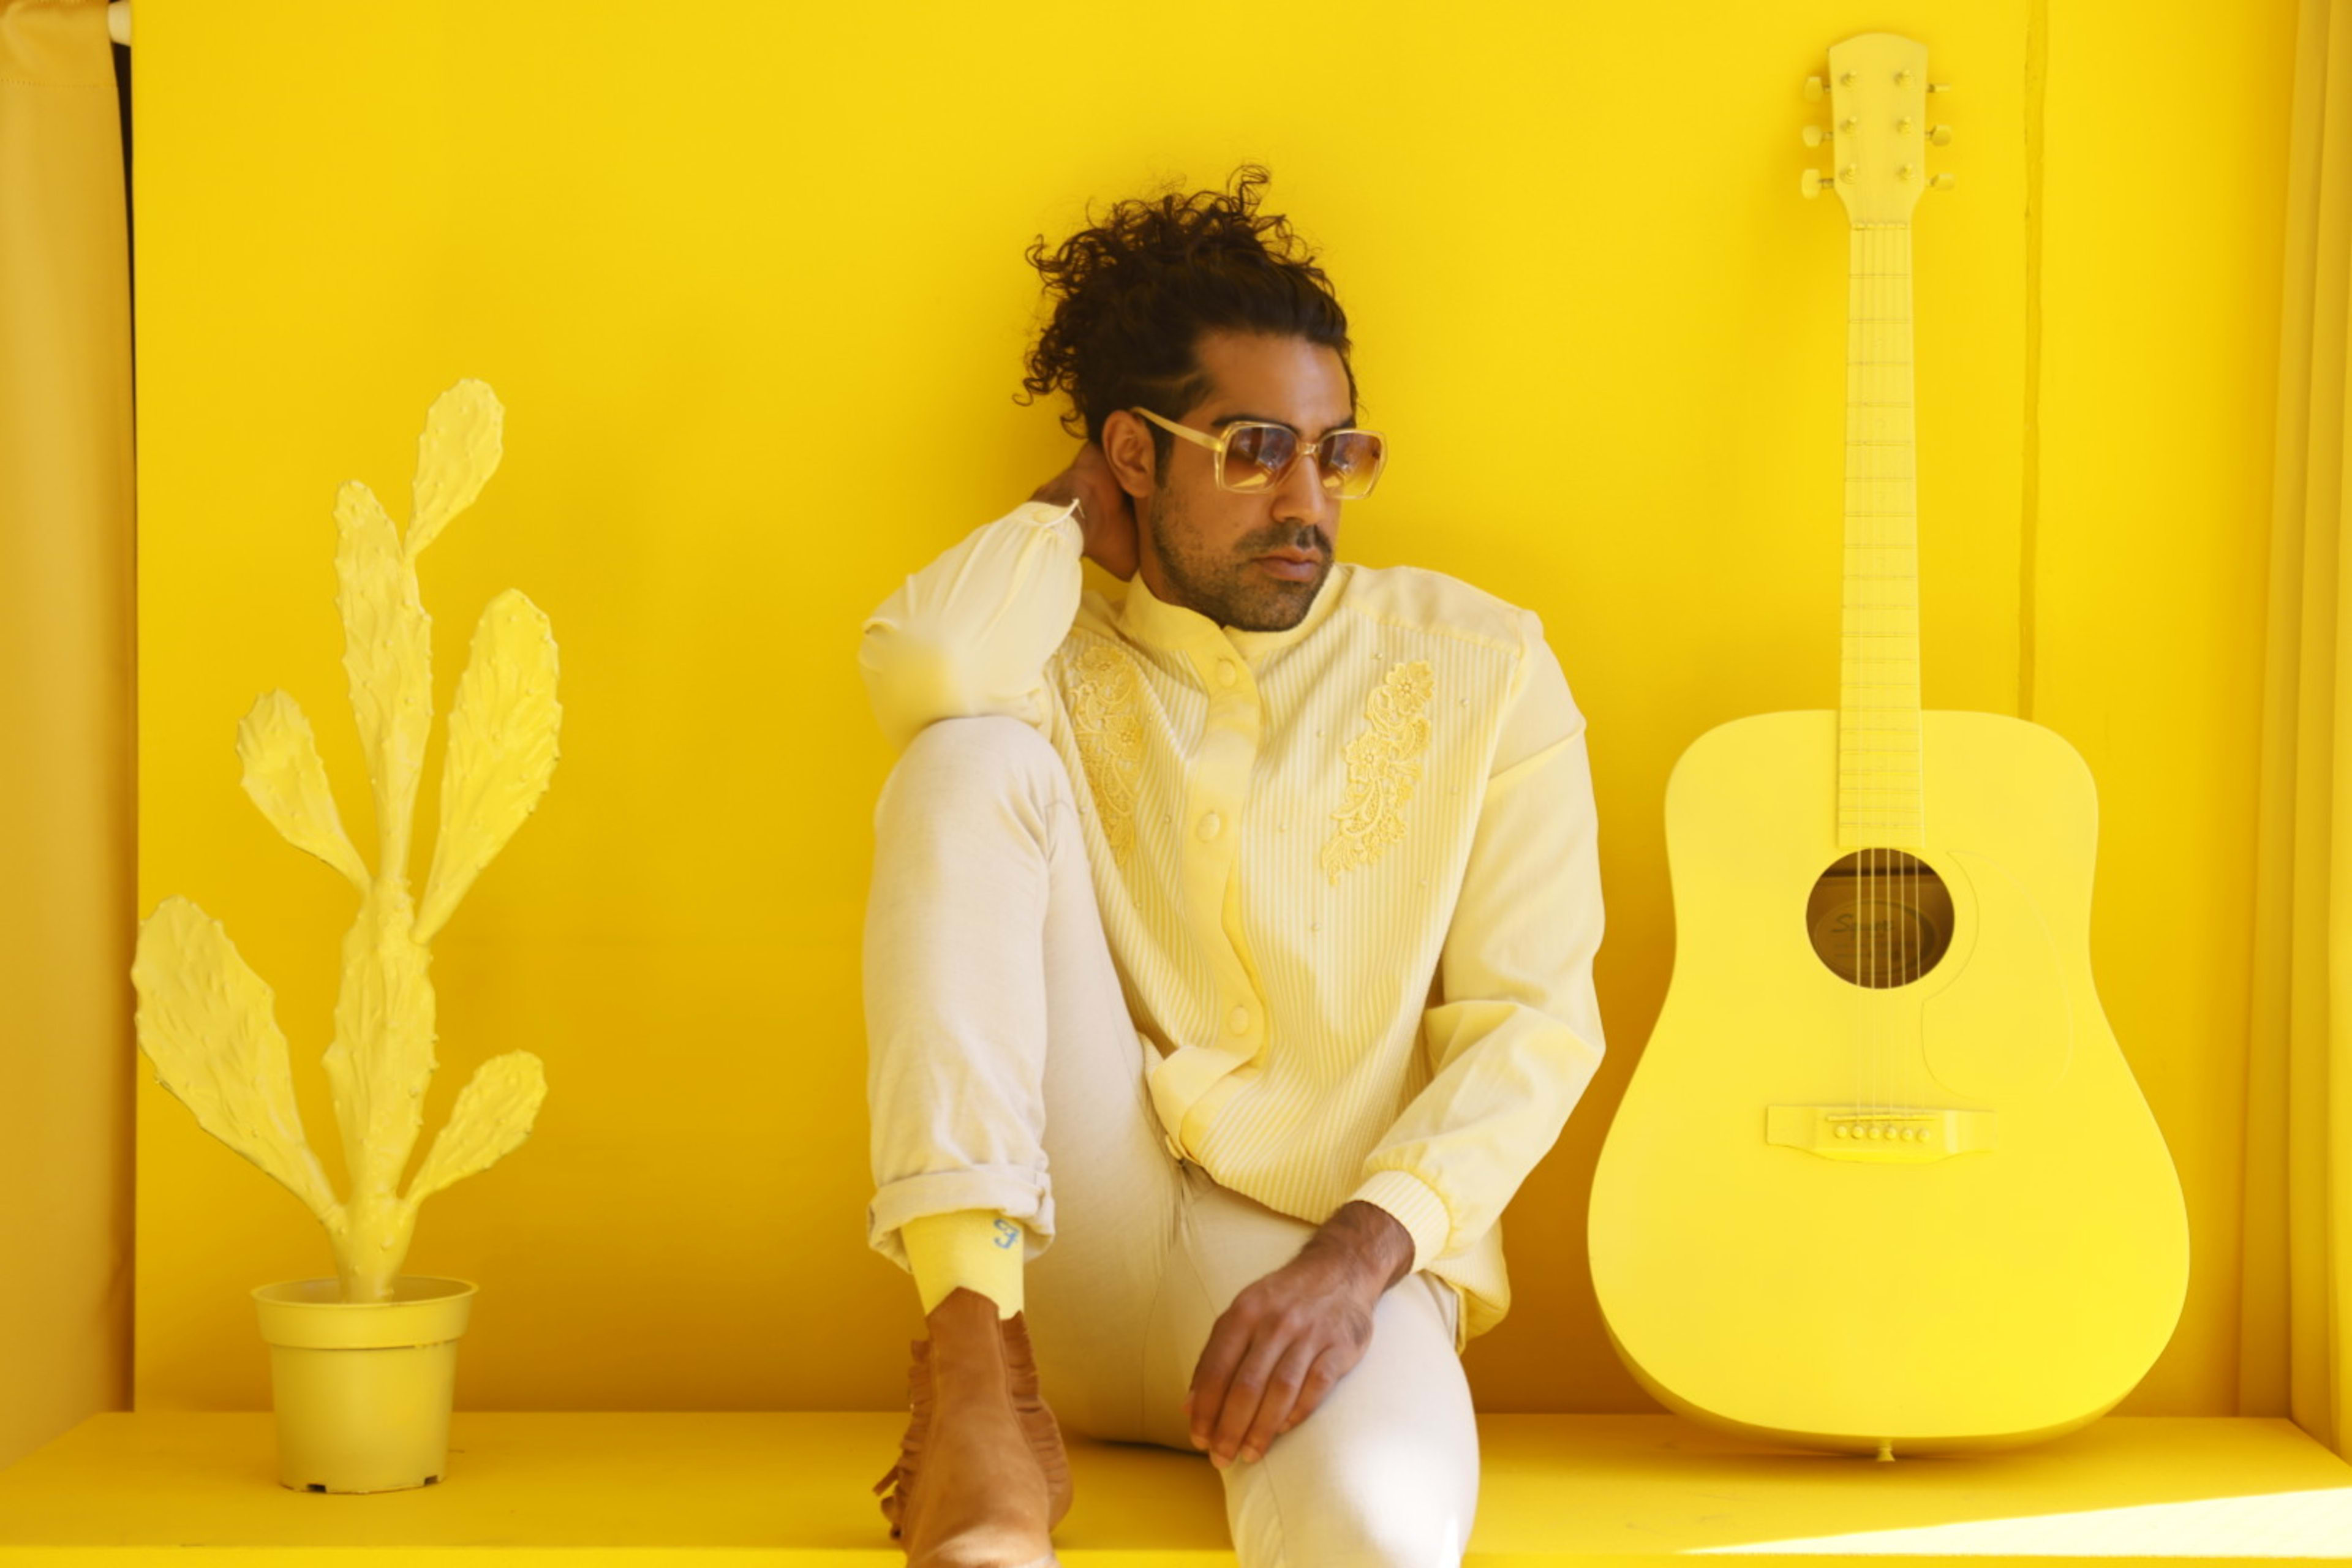 A retro photoshoot featuring a man sitting on a yellow shelf with a guitar.